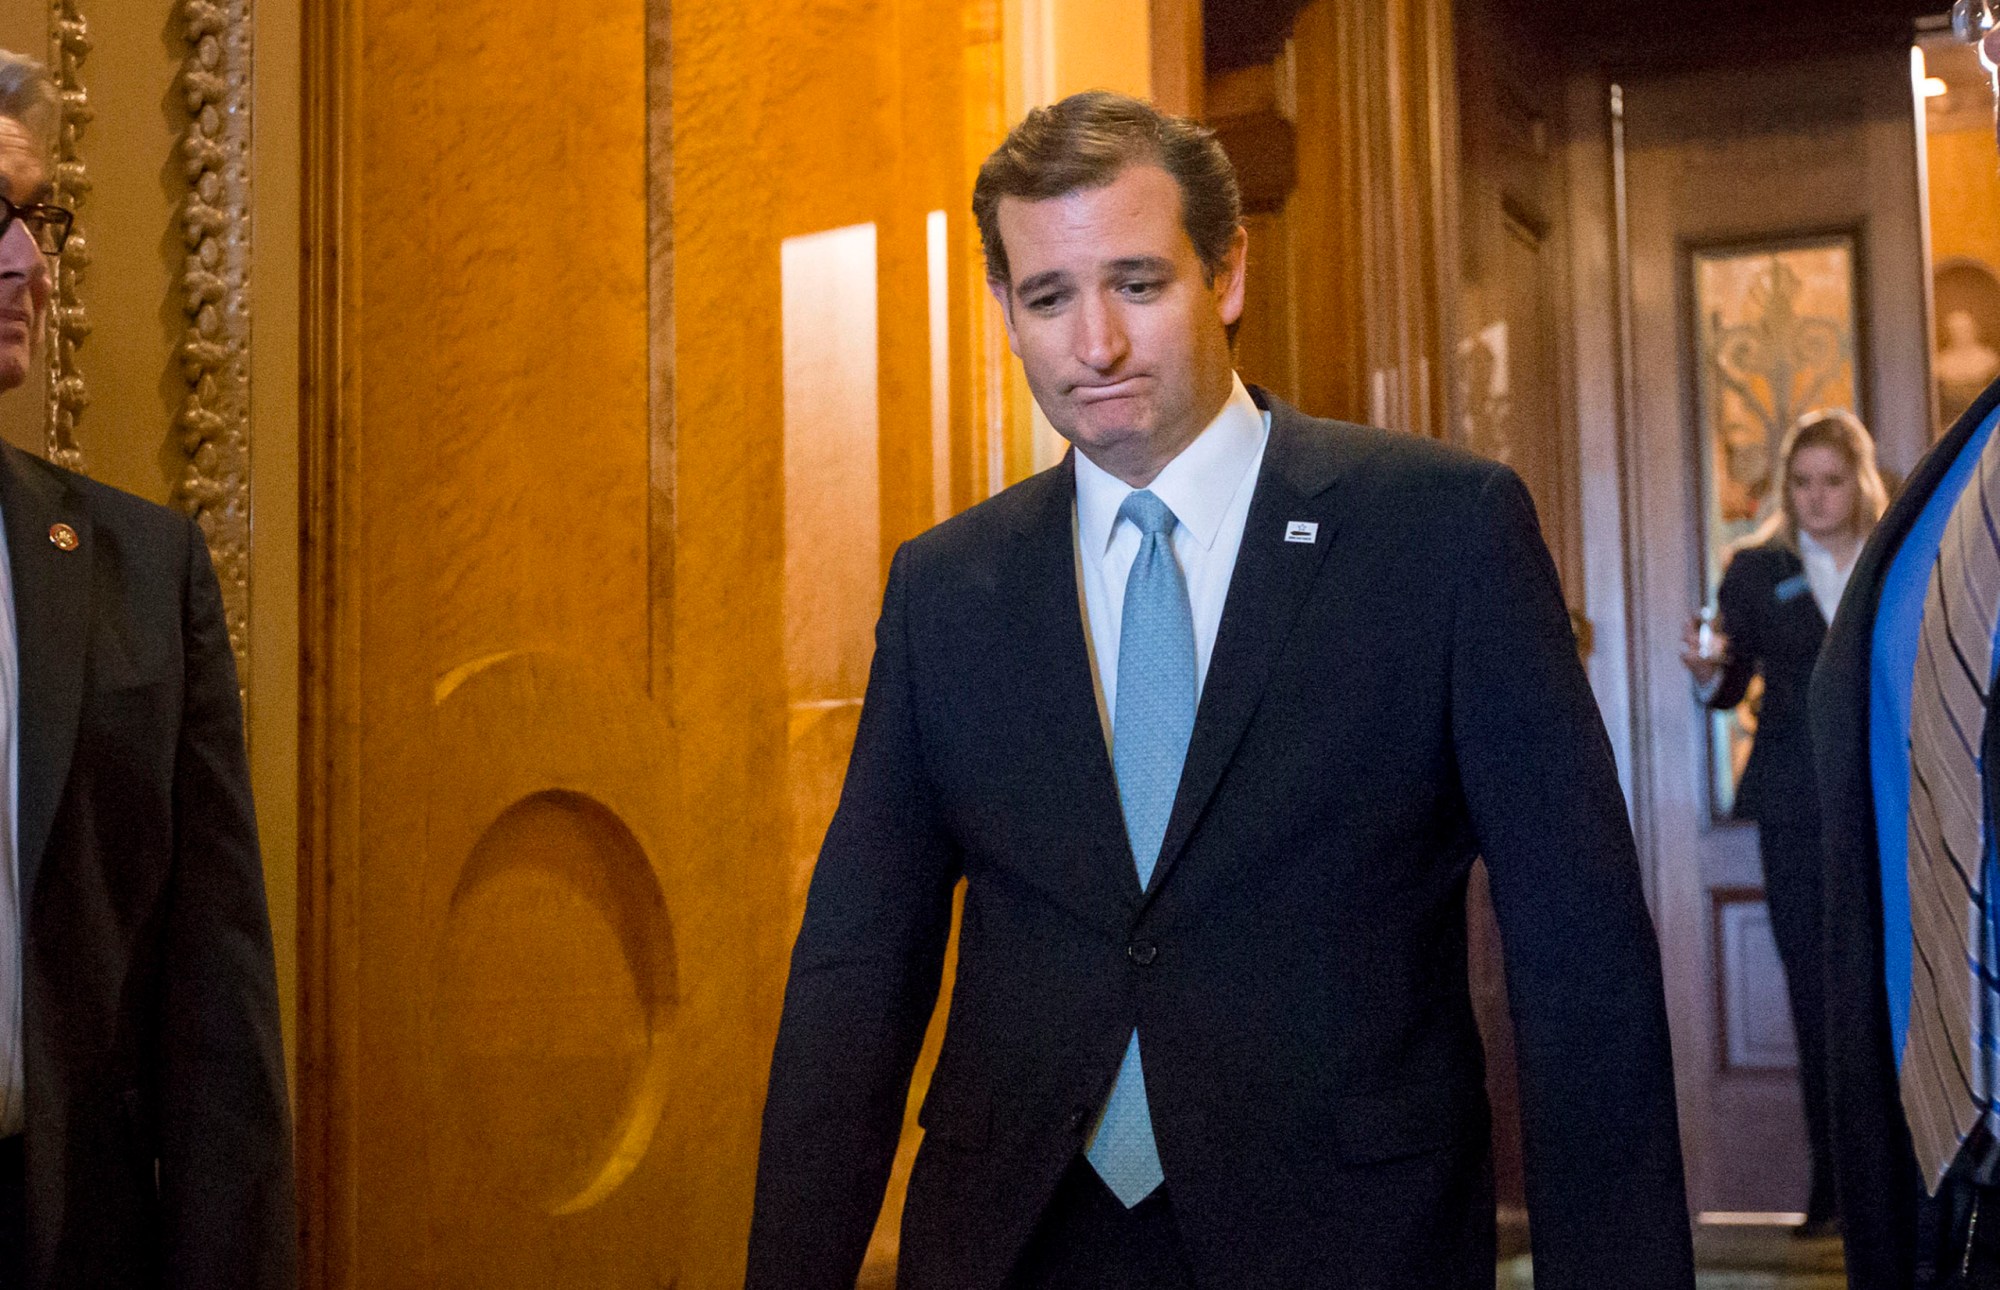 Sen. Ted Cruz (R-TX) emerges from the Senate Chamber on Wednesday, September 25, 2013, after his overnight crusade against the Affordable Care Act, popularly known as Obamacare. (AP/J. Scott Applewhite)